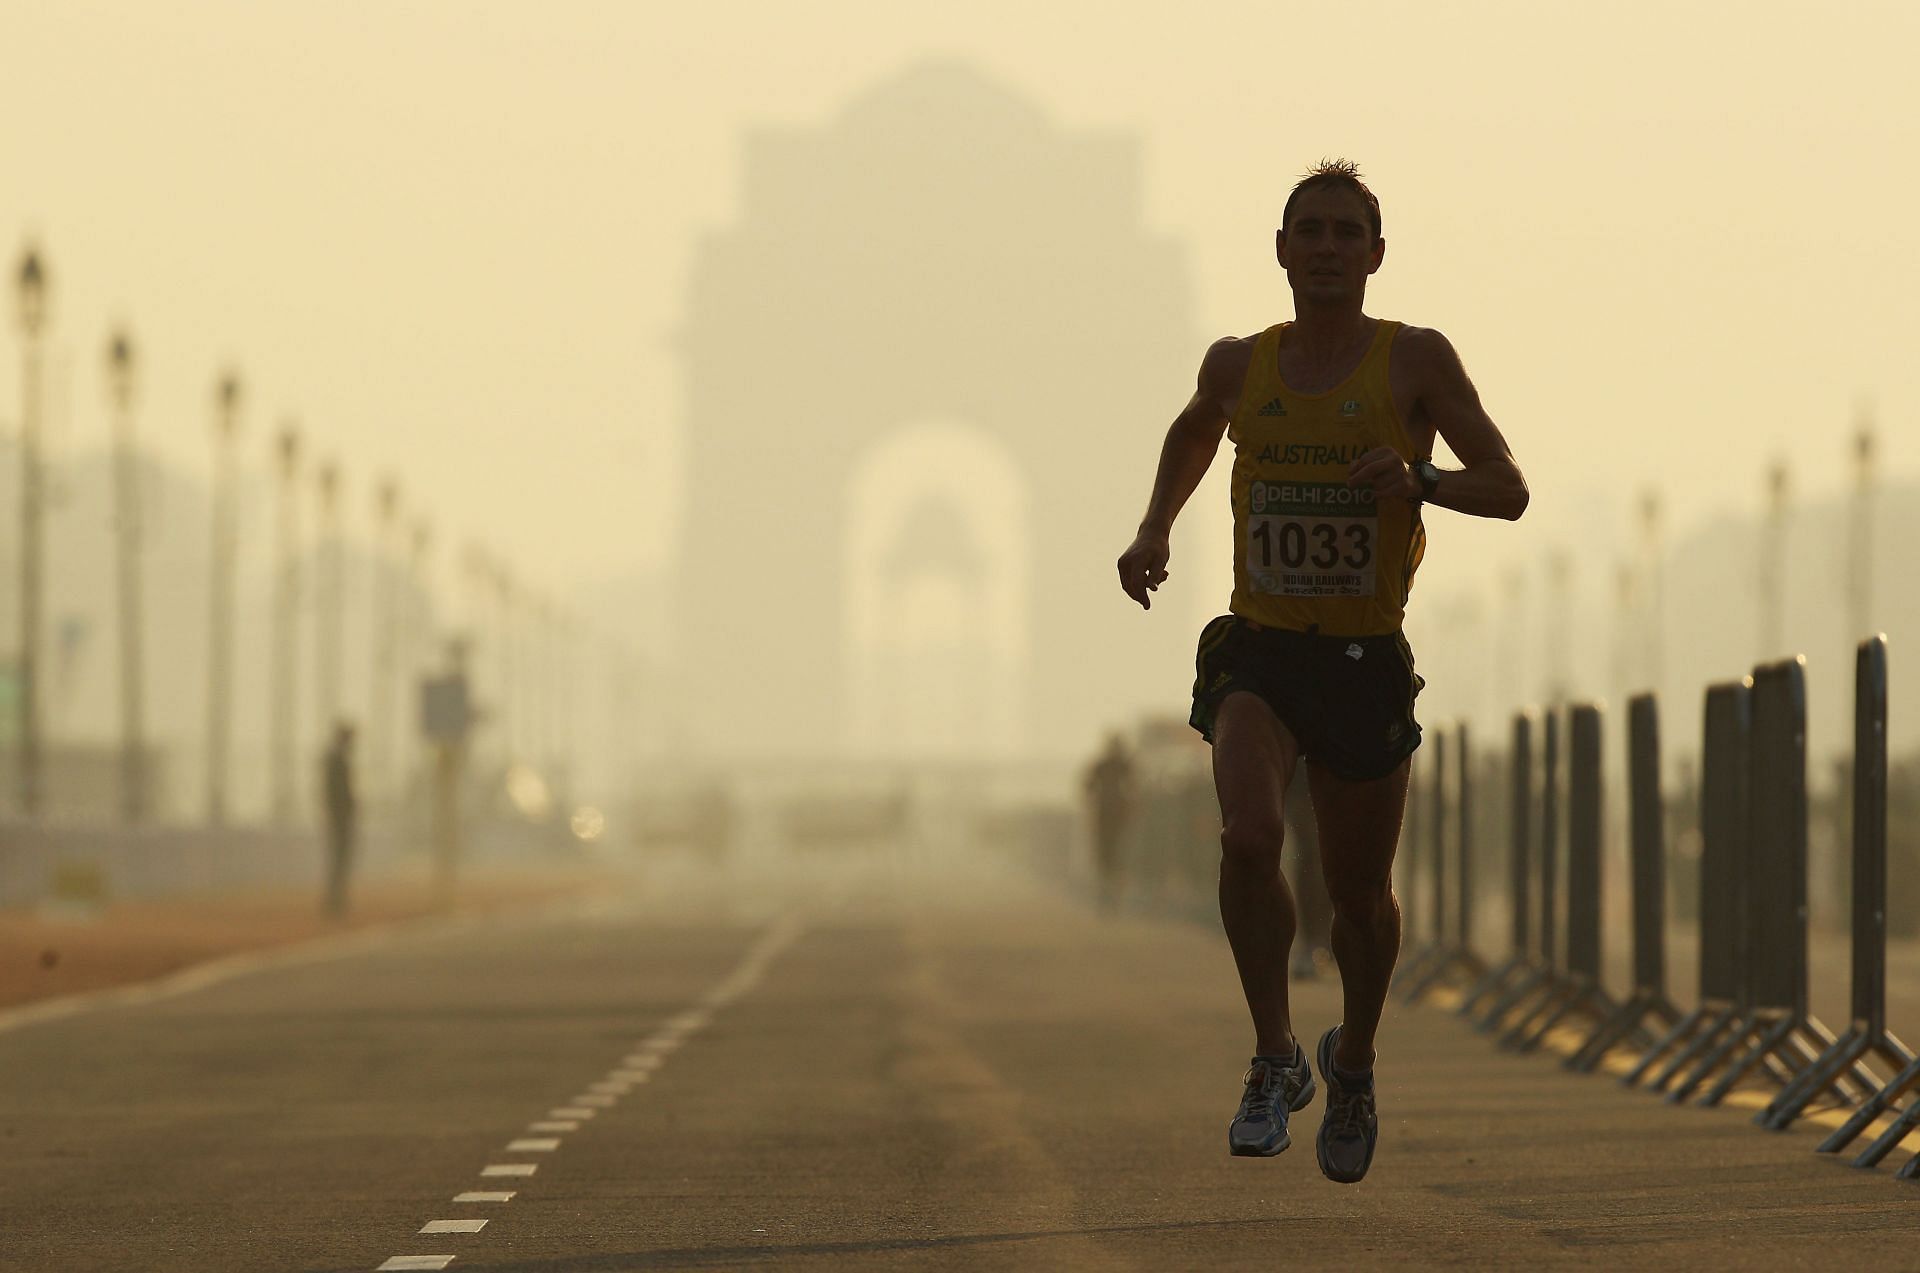 A marathon runner in action during the 2010 Commonwealth Games (Image courtesy: Getty Images)